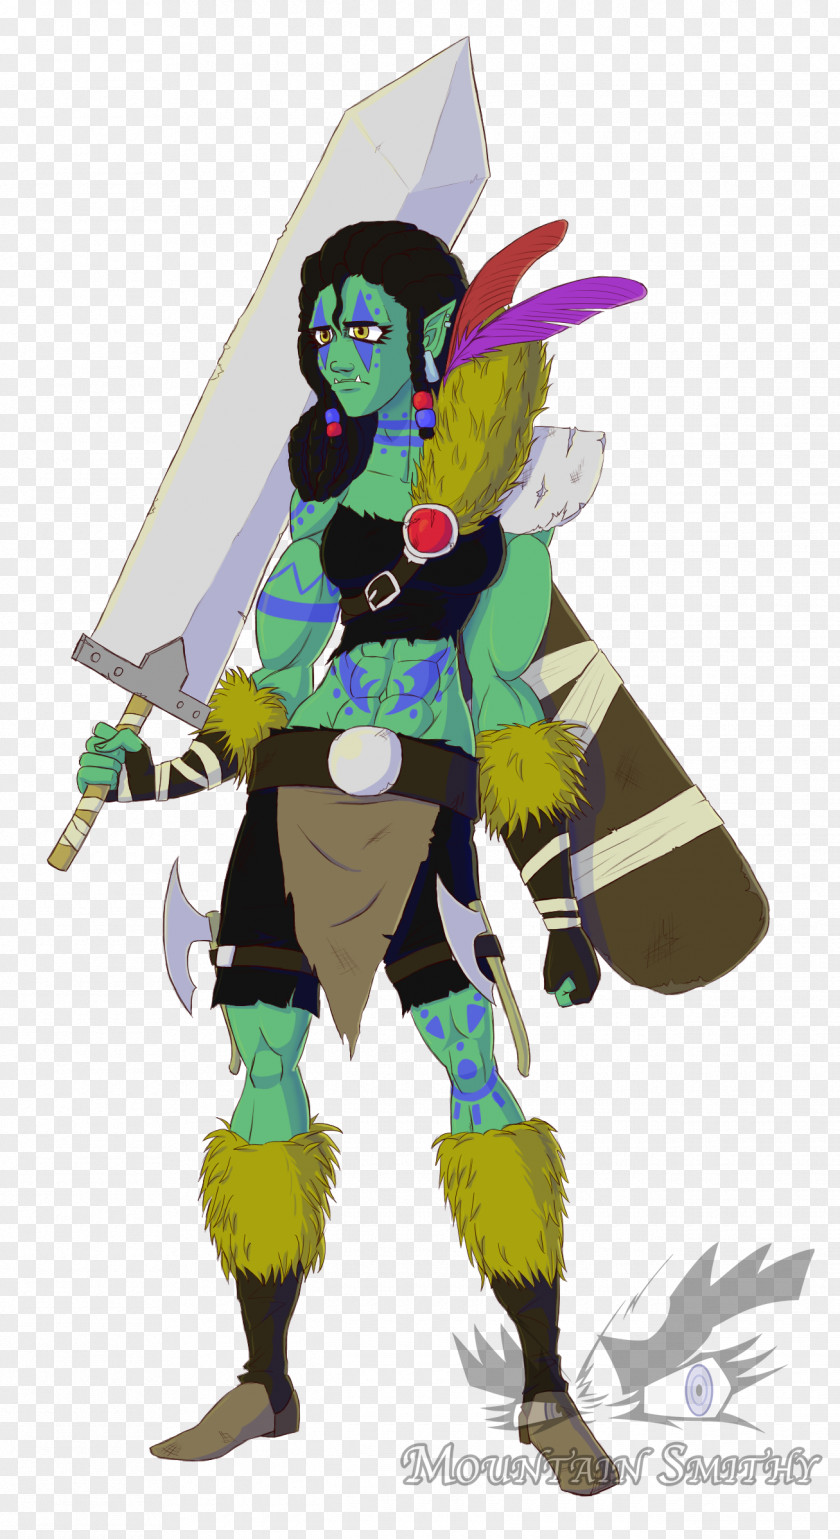 Half Orc Ranger Dungeons & Dragons Pathfinder Roleplaying Game Goblin Half-orc PNG